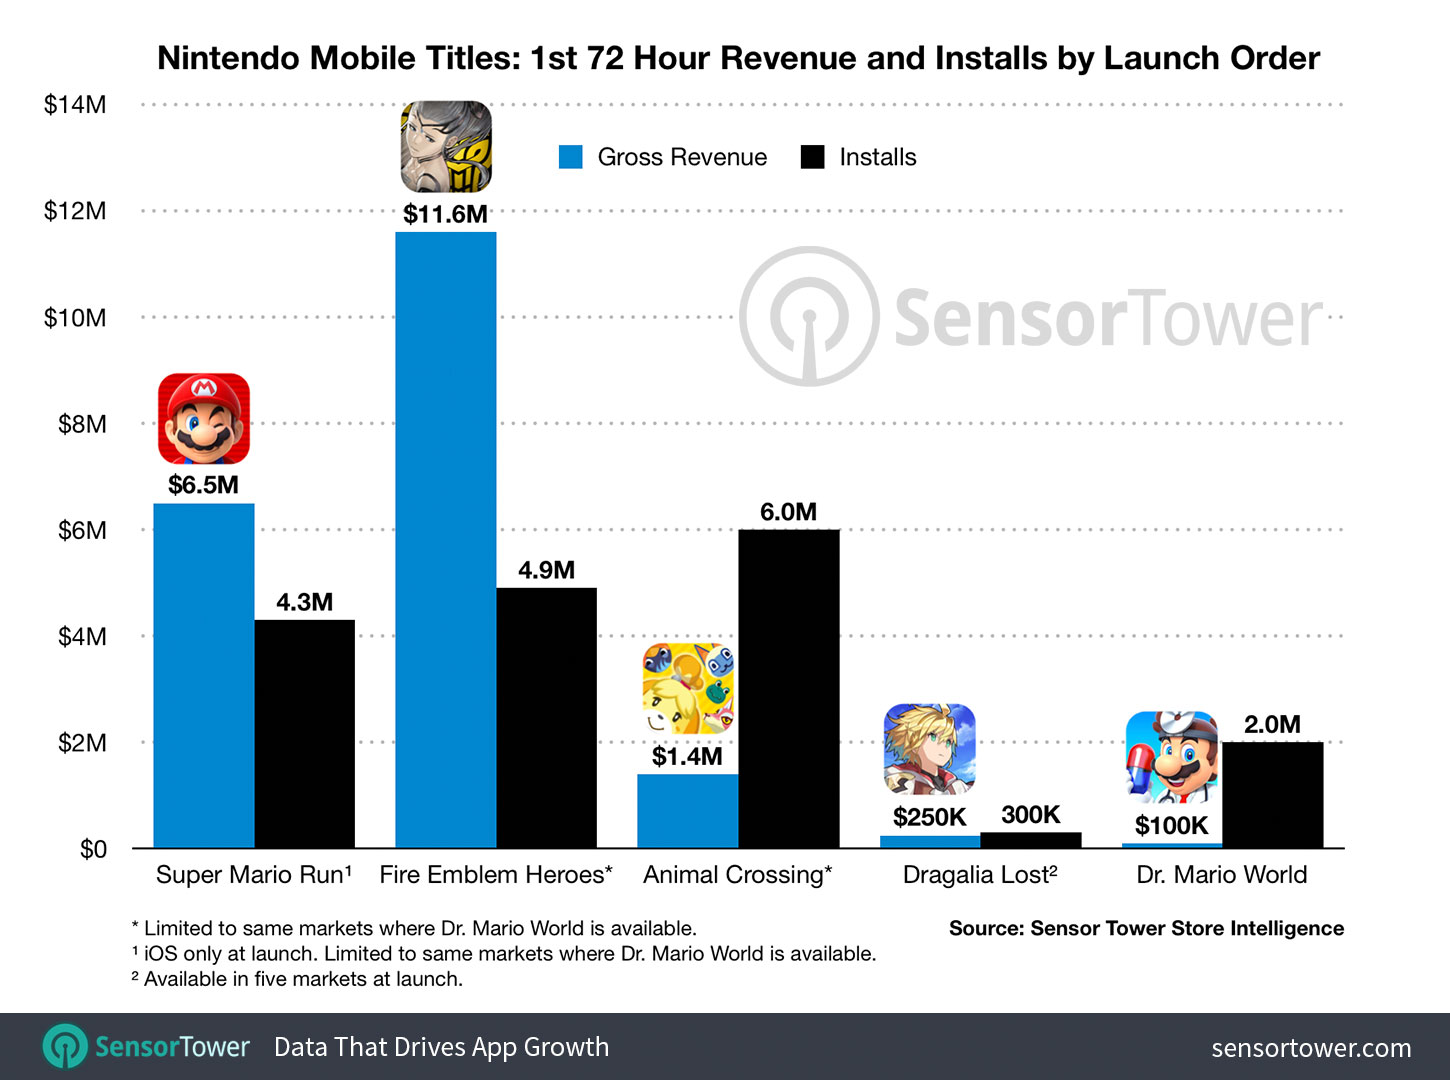 Nintendo Mobile Titles Revenue First 72 Hours